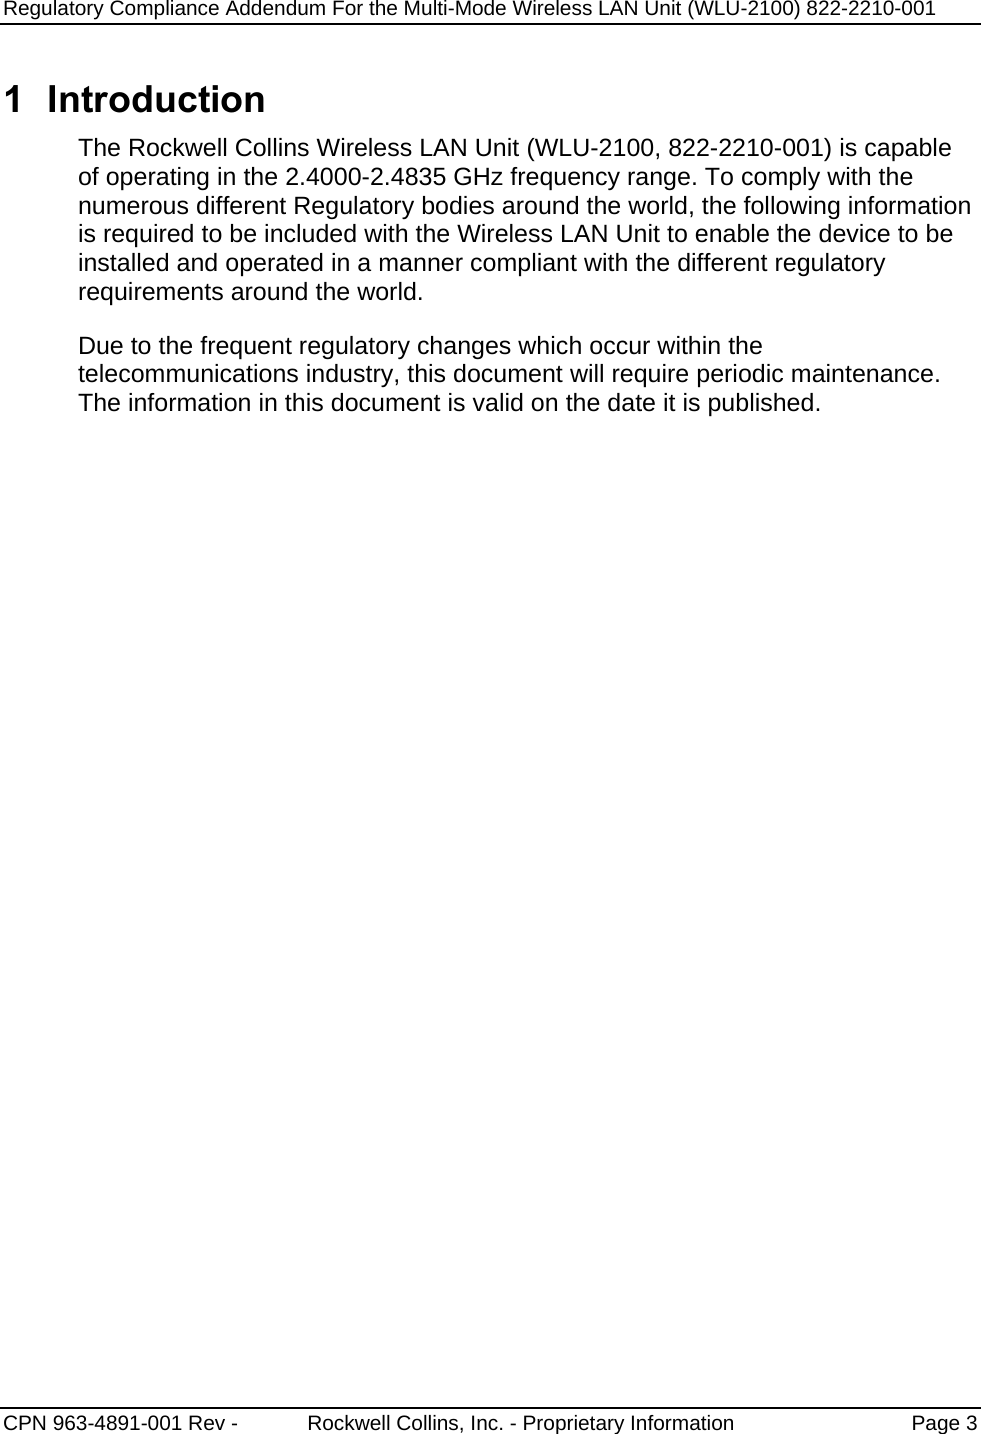 Regulatory Compliance Addendum For the Multi-Mode Wireless LAN Unit (WLU-2100) 822-2210-001   CPN 963-4891-001 Rev -            Rockwell Collins, Inc. - Proprietary Information  Page 3  1 Introduction The Rockwell Collins Wireless LAN Unit (WLU-2100, 822-2210-001) is capable of operating in the 2.4000-2.4835 GHz frequency range. To comply with the numerous different Regulatory bodies around the world, the following information is required to be included with the Wireless LAN Unit to enable the device to be installed and operated in a manner compliant with the different regulatory requirements around the world. Due to the frequent regulatory changes which occur within the telecommunications industry, this document will require periodic maintenance.  The information in this document is valid on the date it is published.  